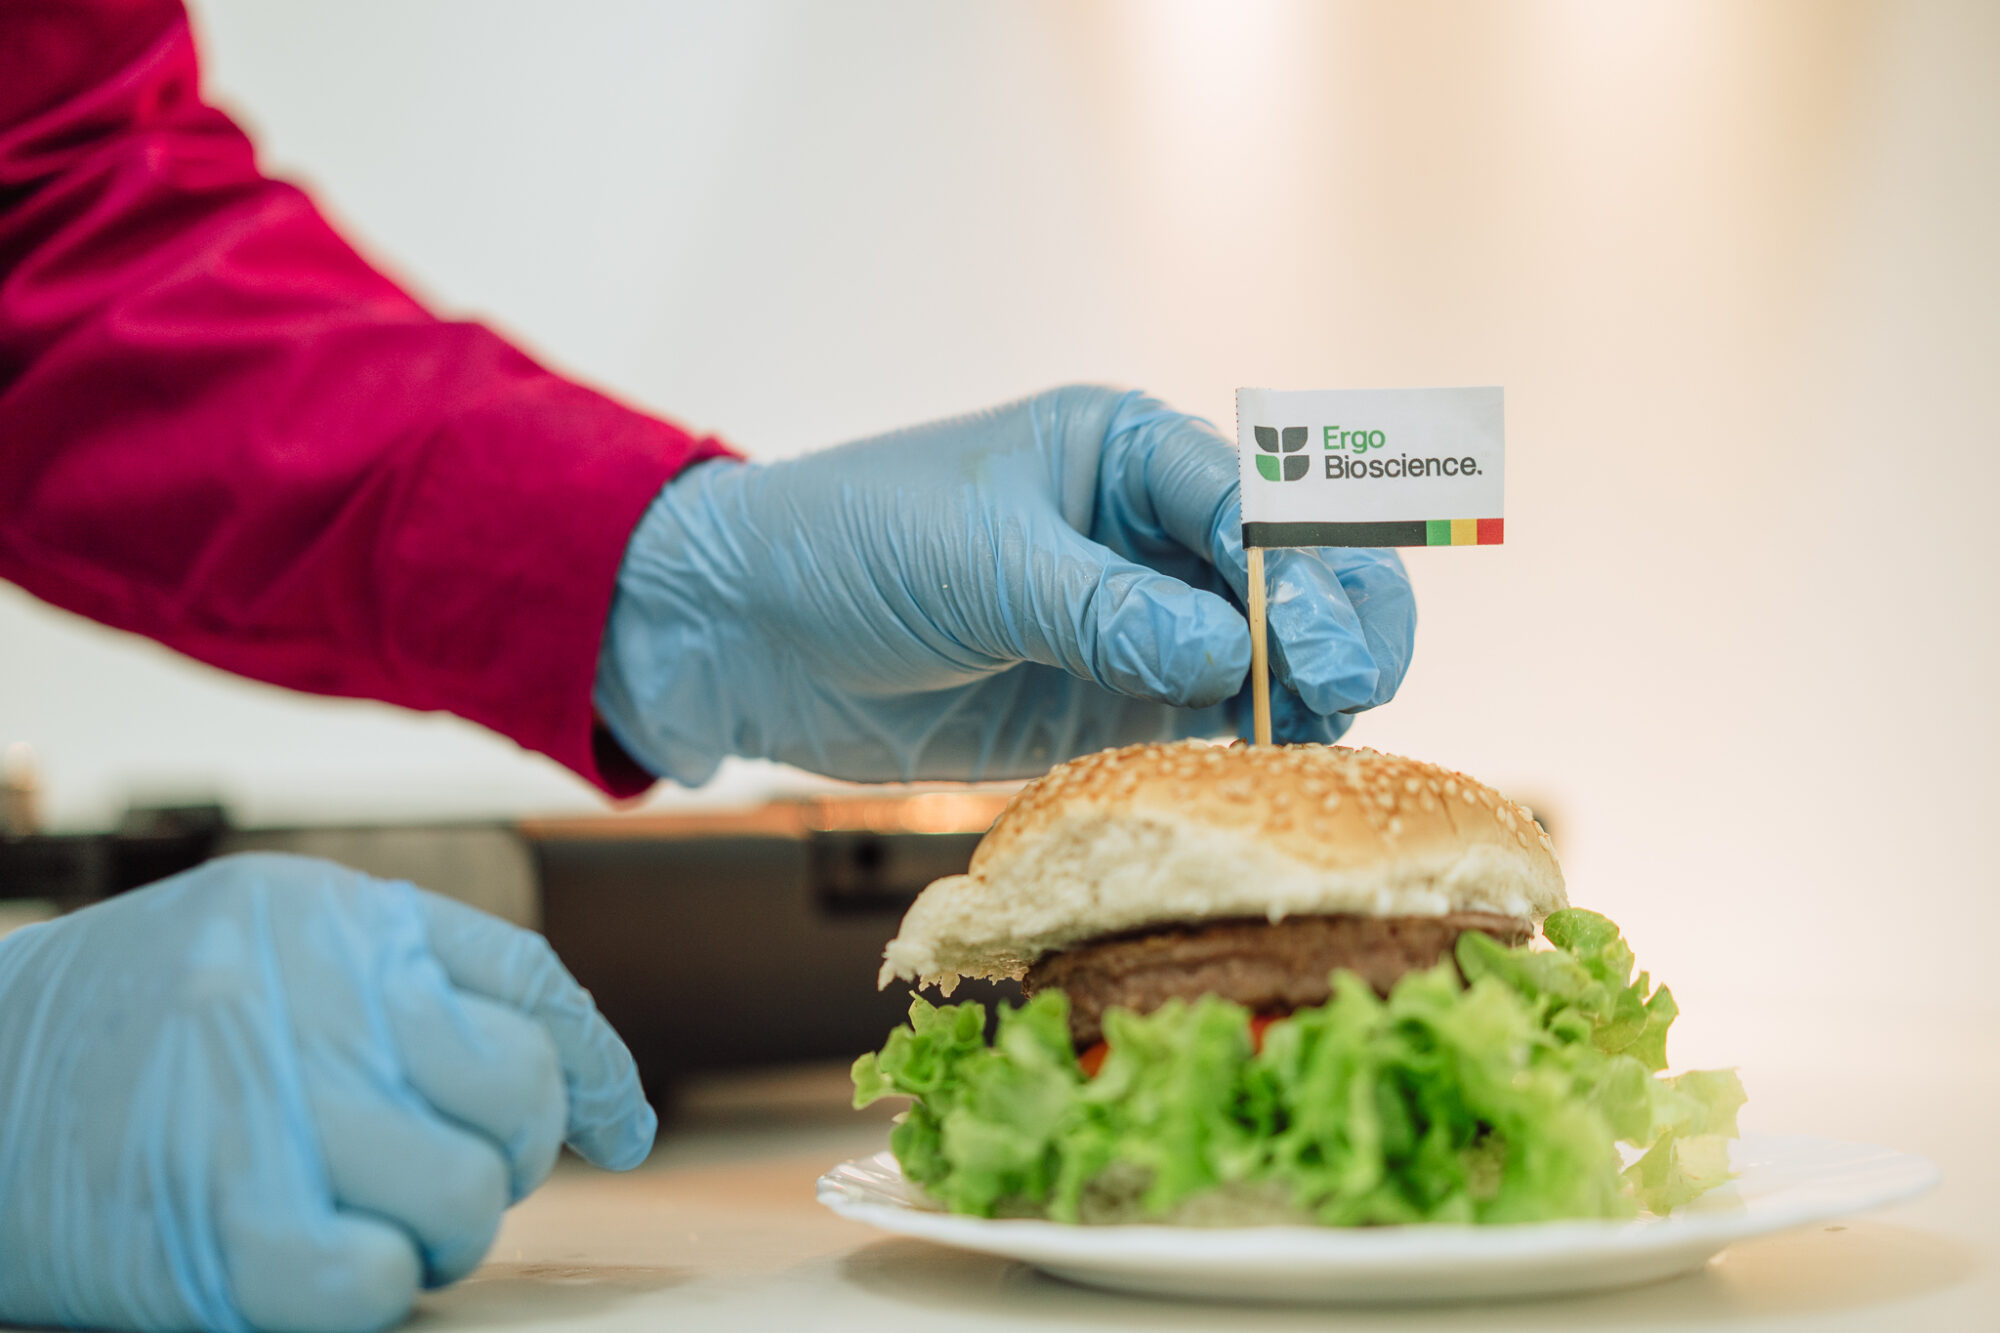 <p>Argentina has in recent years seen a notable growth in the number of start-ups and labs producing plant-based or cultured meat substitutes, including Ergo BioScience. The company uses carrots to produce proteins that generate the flavour and texture of meat. (Image: Ergo BioScience)</p>